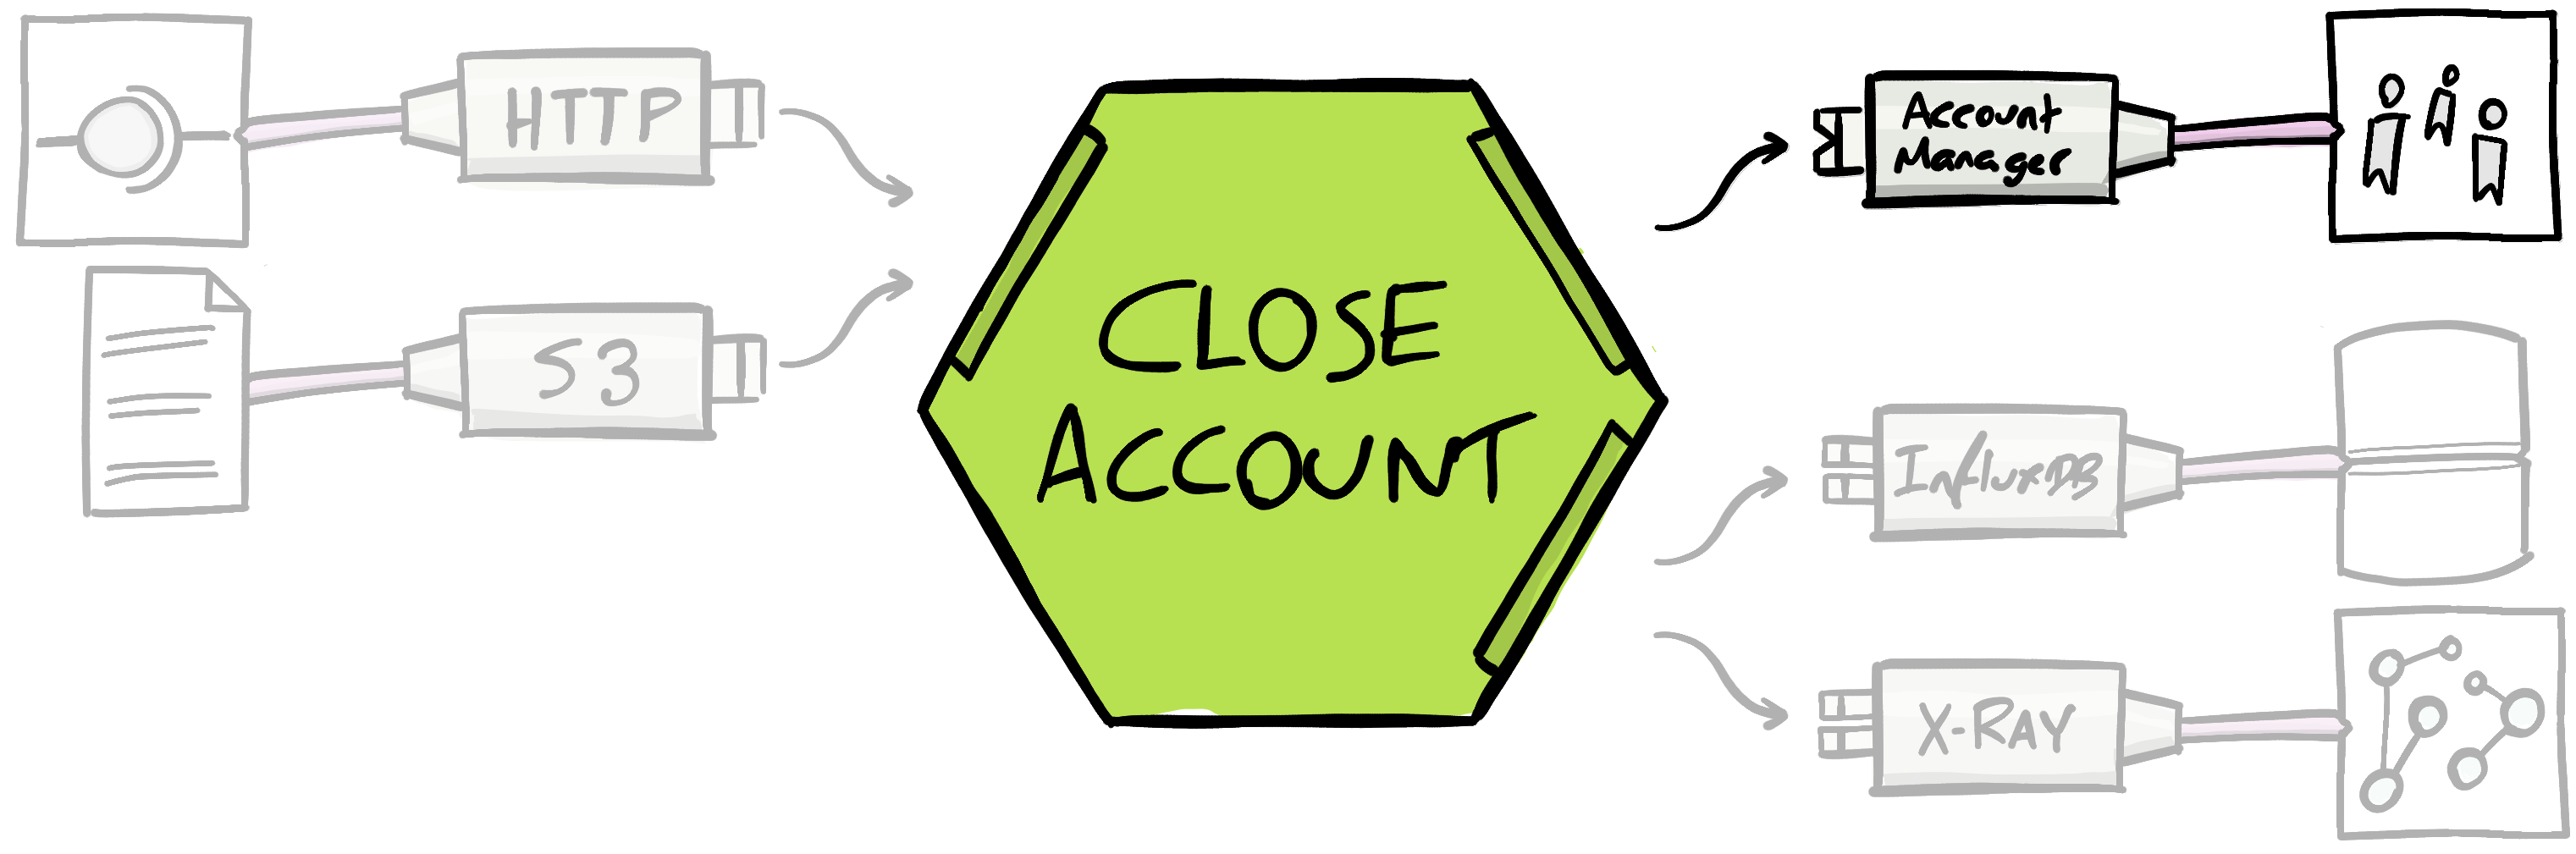 Account Management Adaptor right of the hexagon